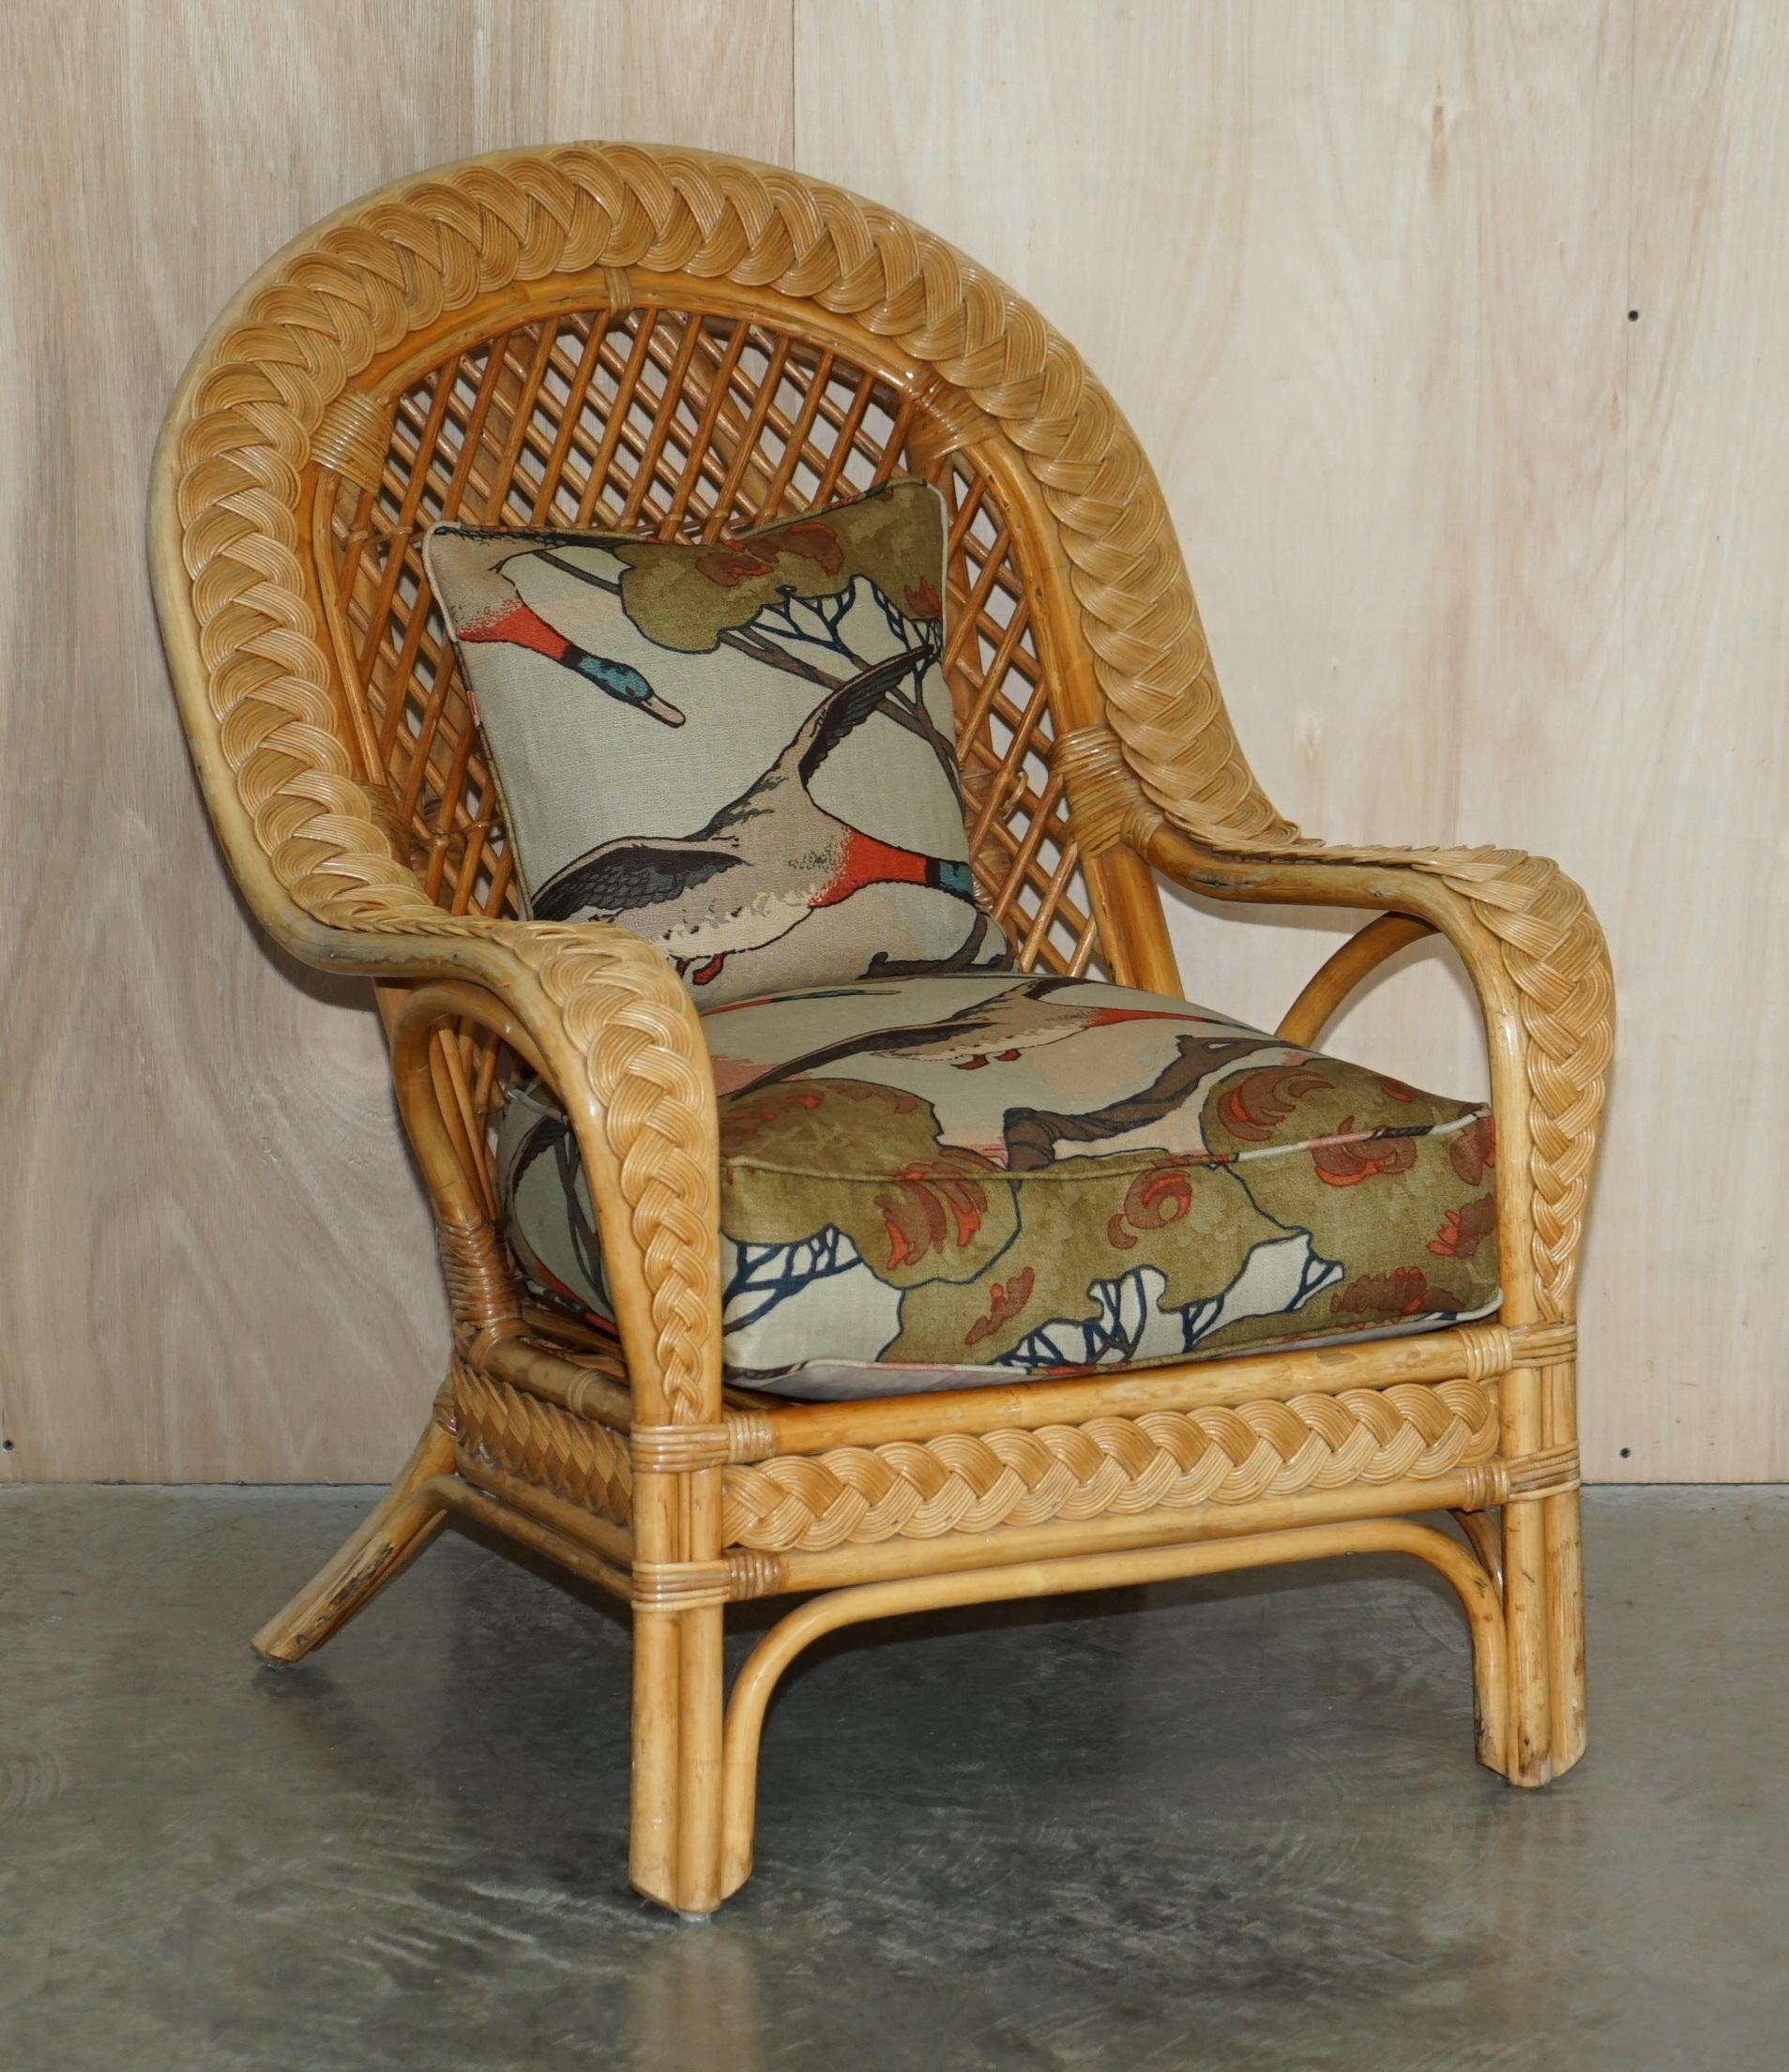 Royal House Antiques

Royal House Antiques is delighted to offer for sale this stunning suite of vintage wicker conservatory seating with matching footstool and side table upholstered in Mulberry linen Flying Ducks fabric

Please note the delivery